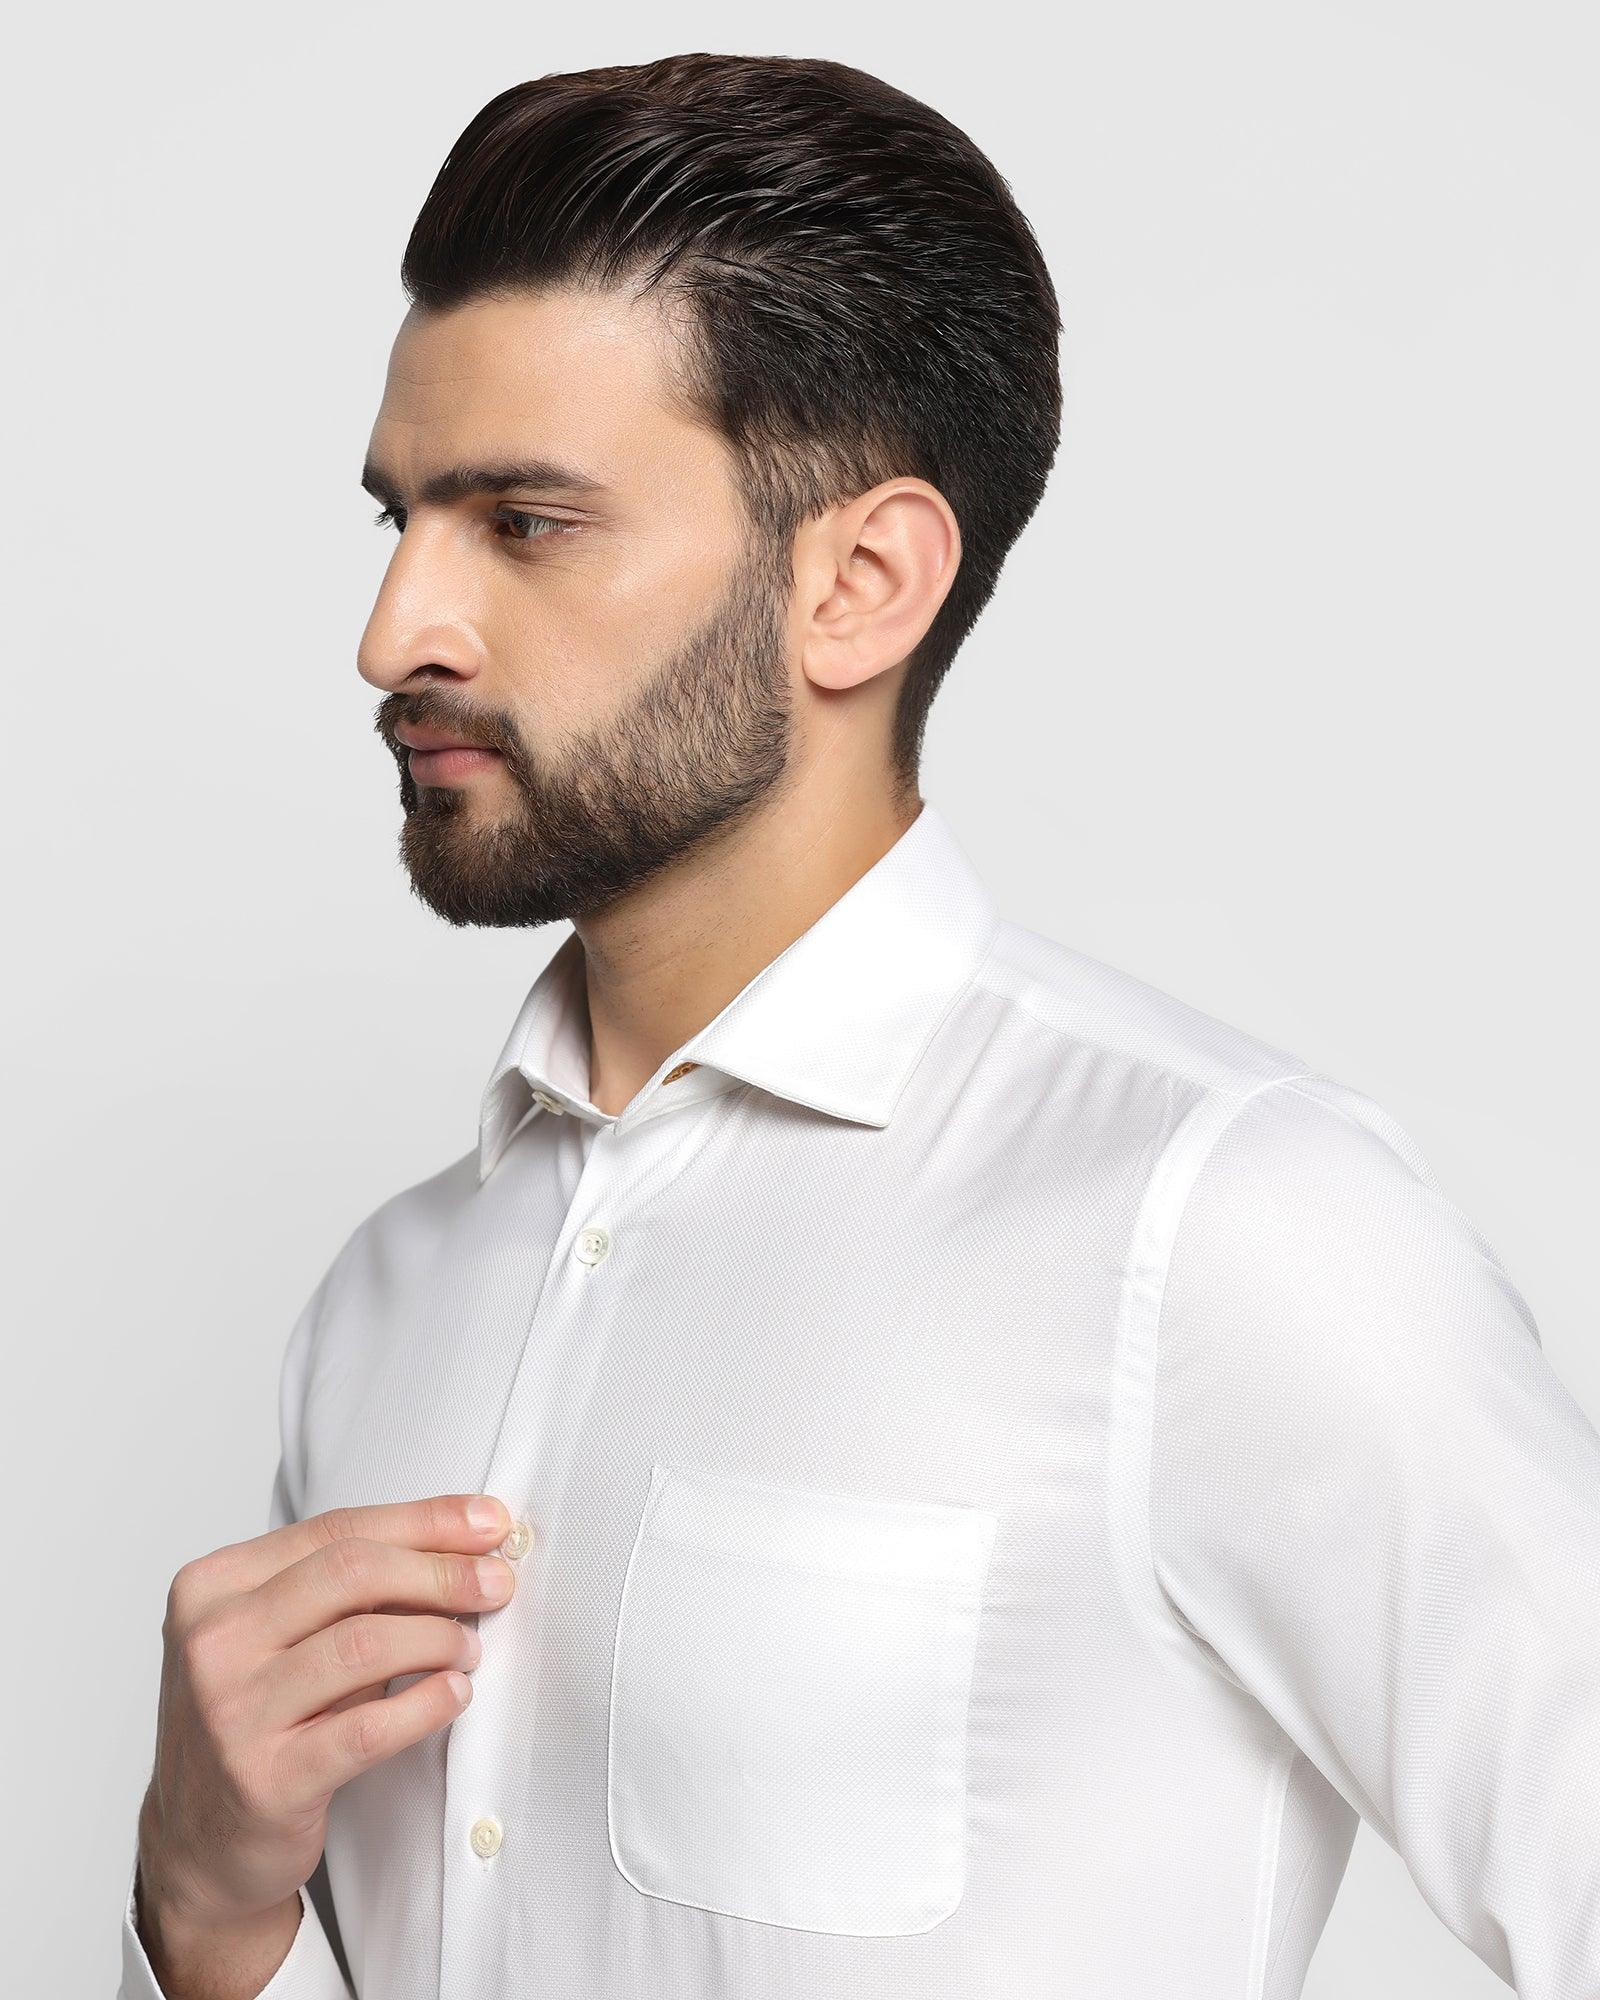 Luxe Formal White Textured Shirt - Scotch